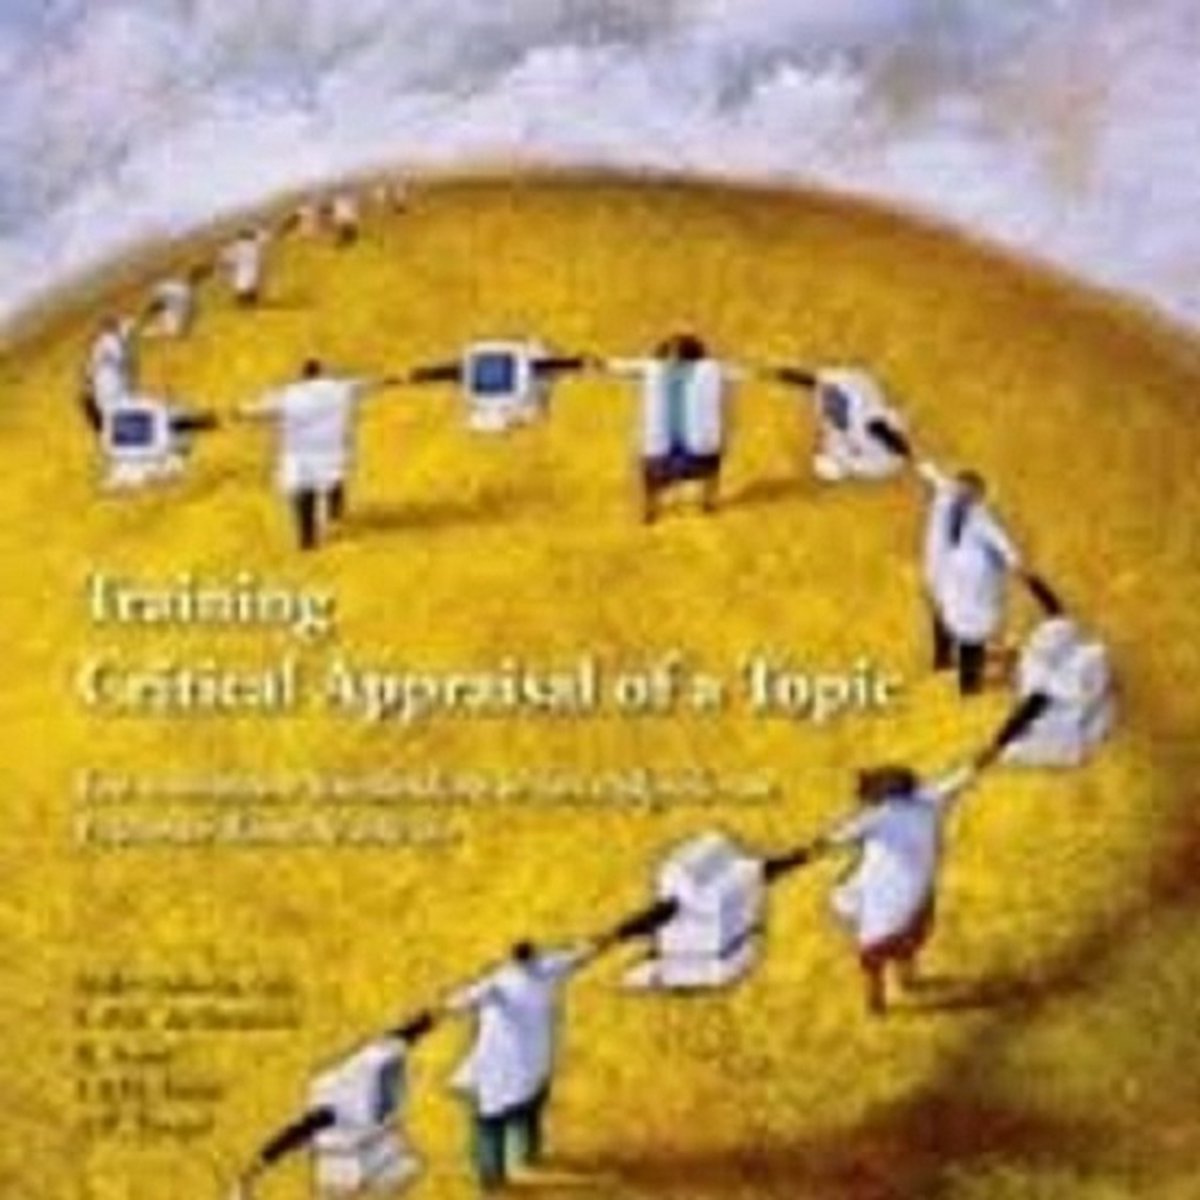 Training Critical Appraisal of a Topic